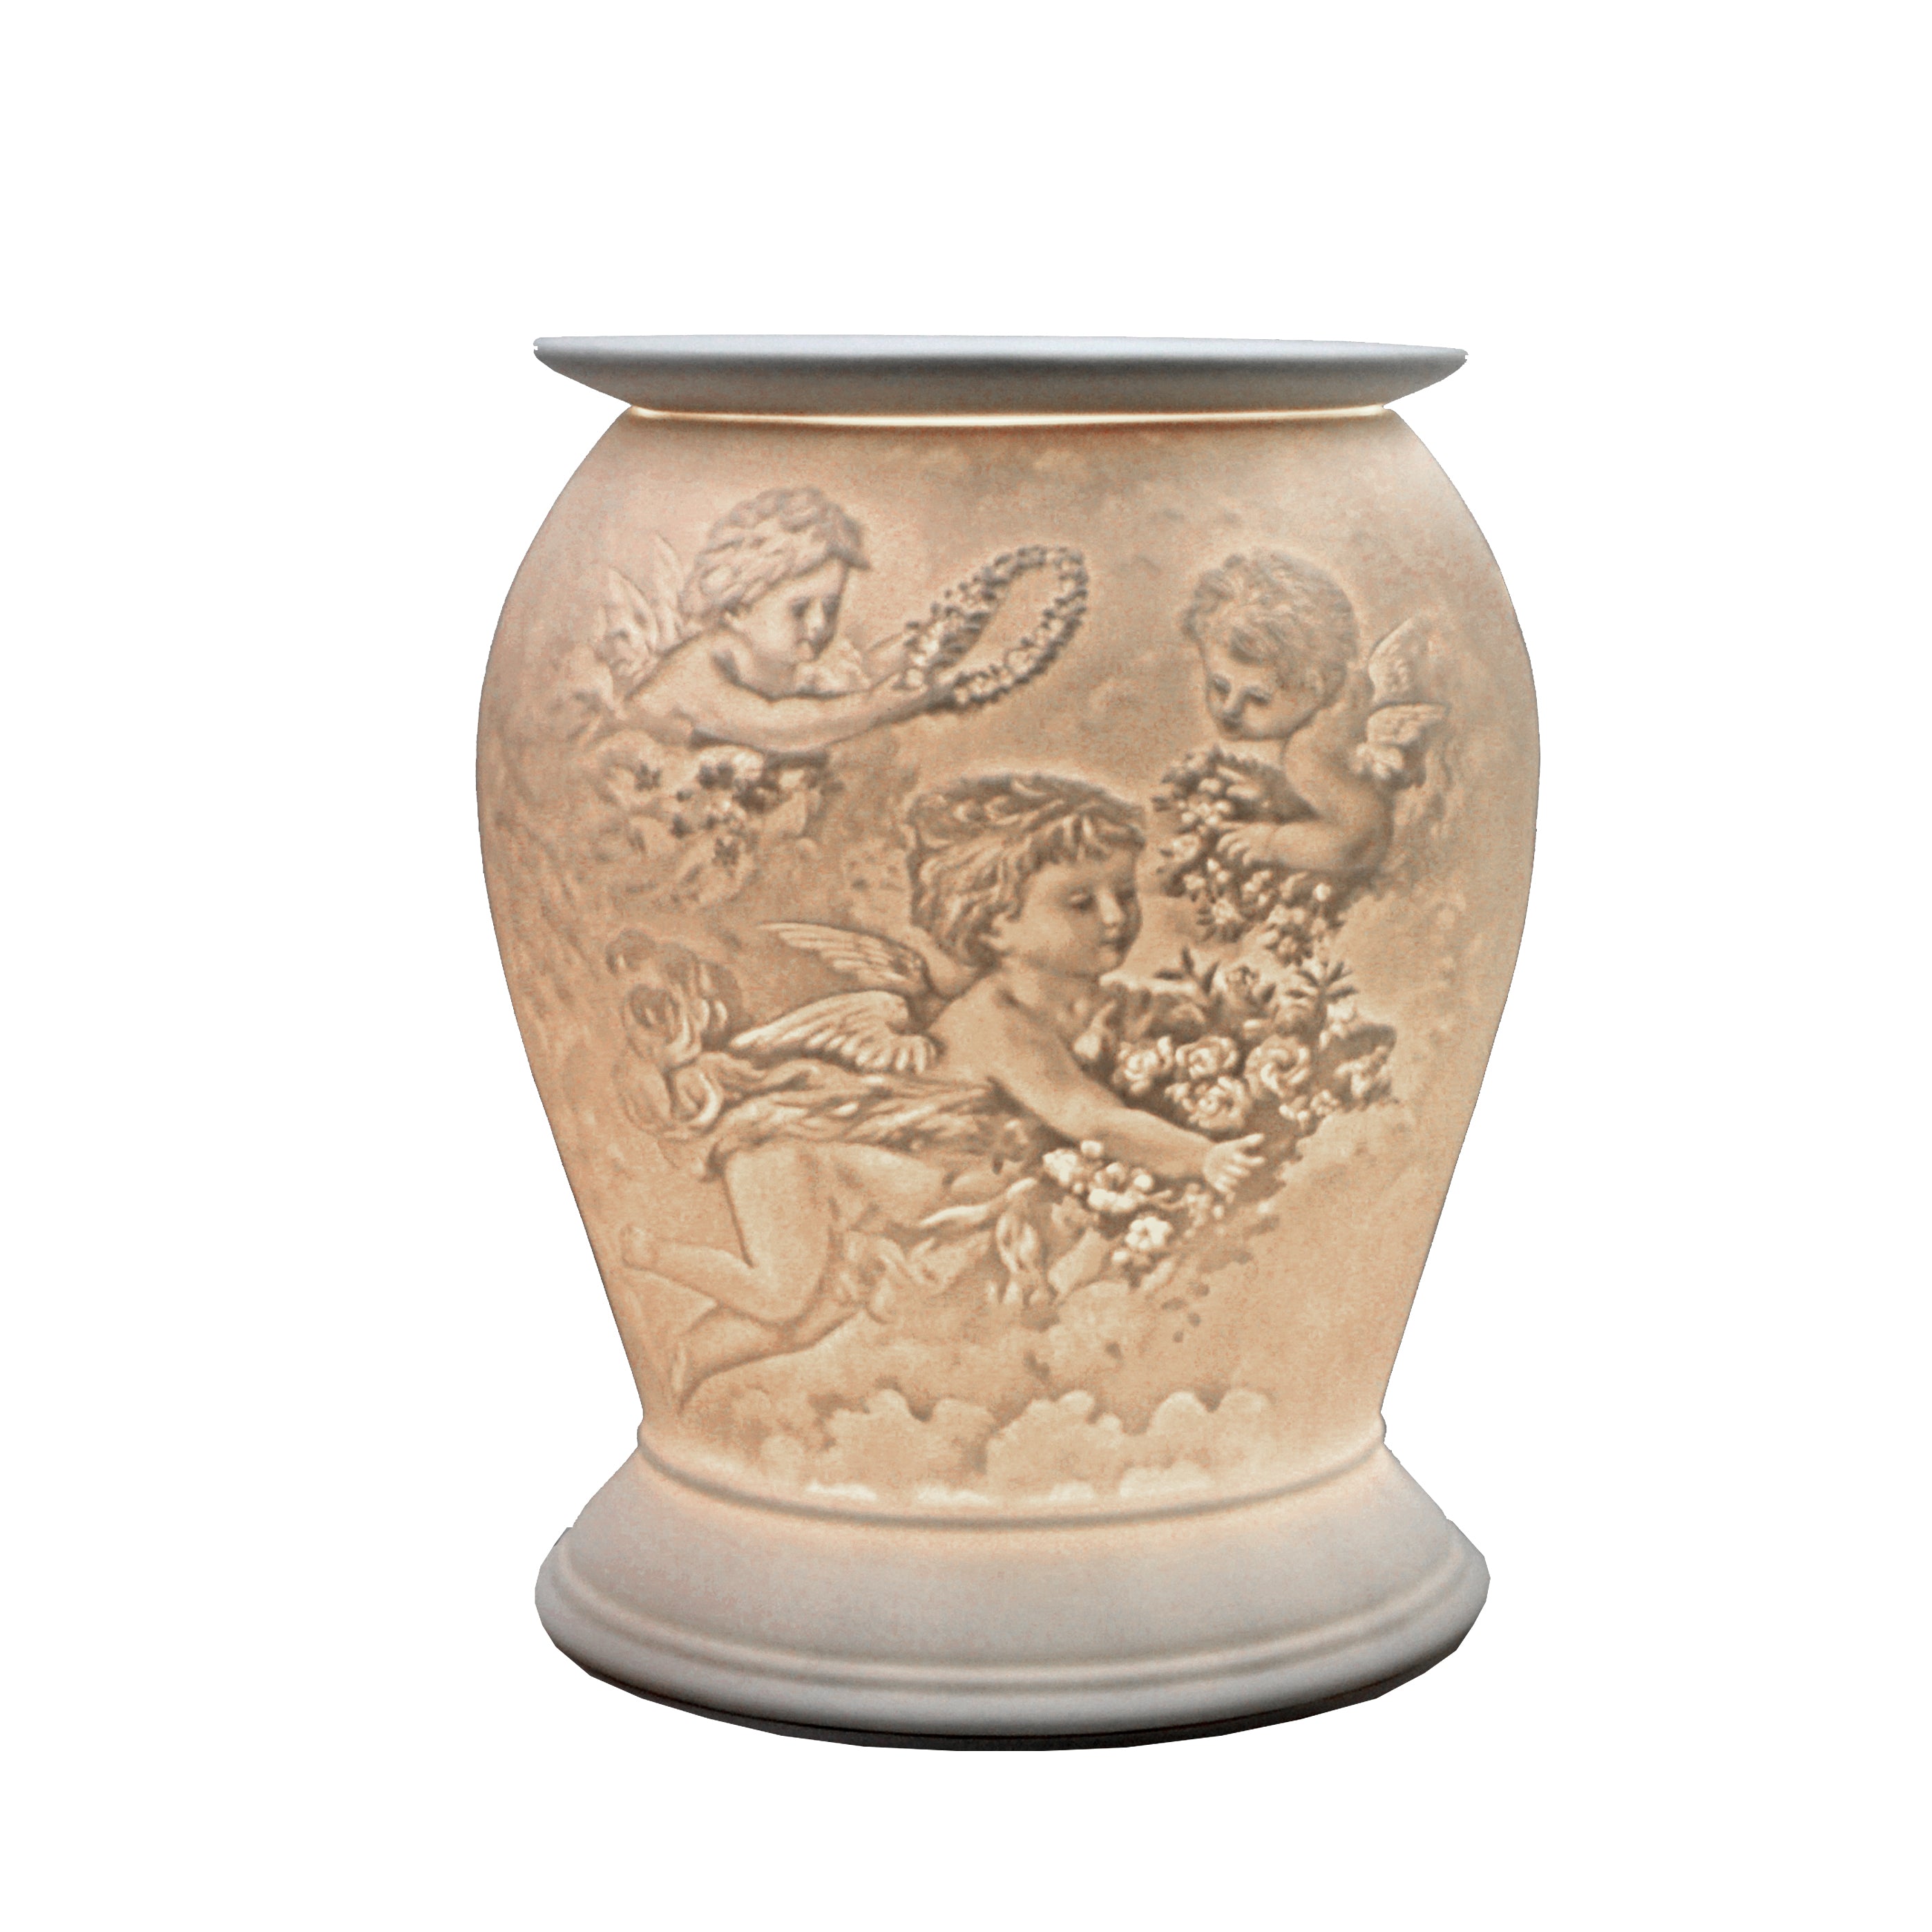 The porcelain material on this Wax Melt Burner allows bright light to shine through it, providing the opportunity to create this magnificent Cherub design. This is done by crafting images out of thicker and thinner sections of the porcelain, allowing for detailed shadowing and a 3D effect. The porcelains elegant look will fit perfectly in any room is available in a range of designs and two different shapes.